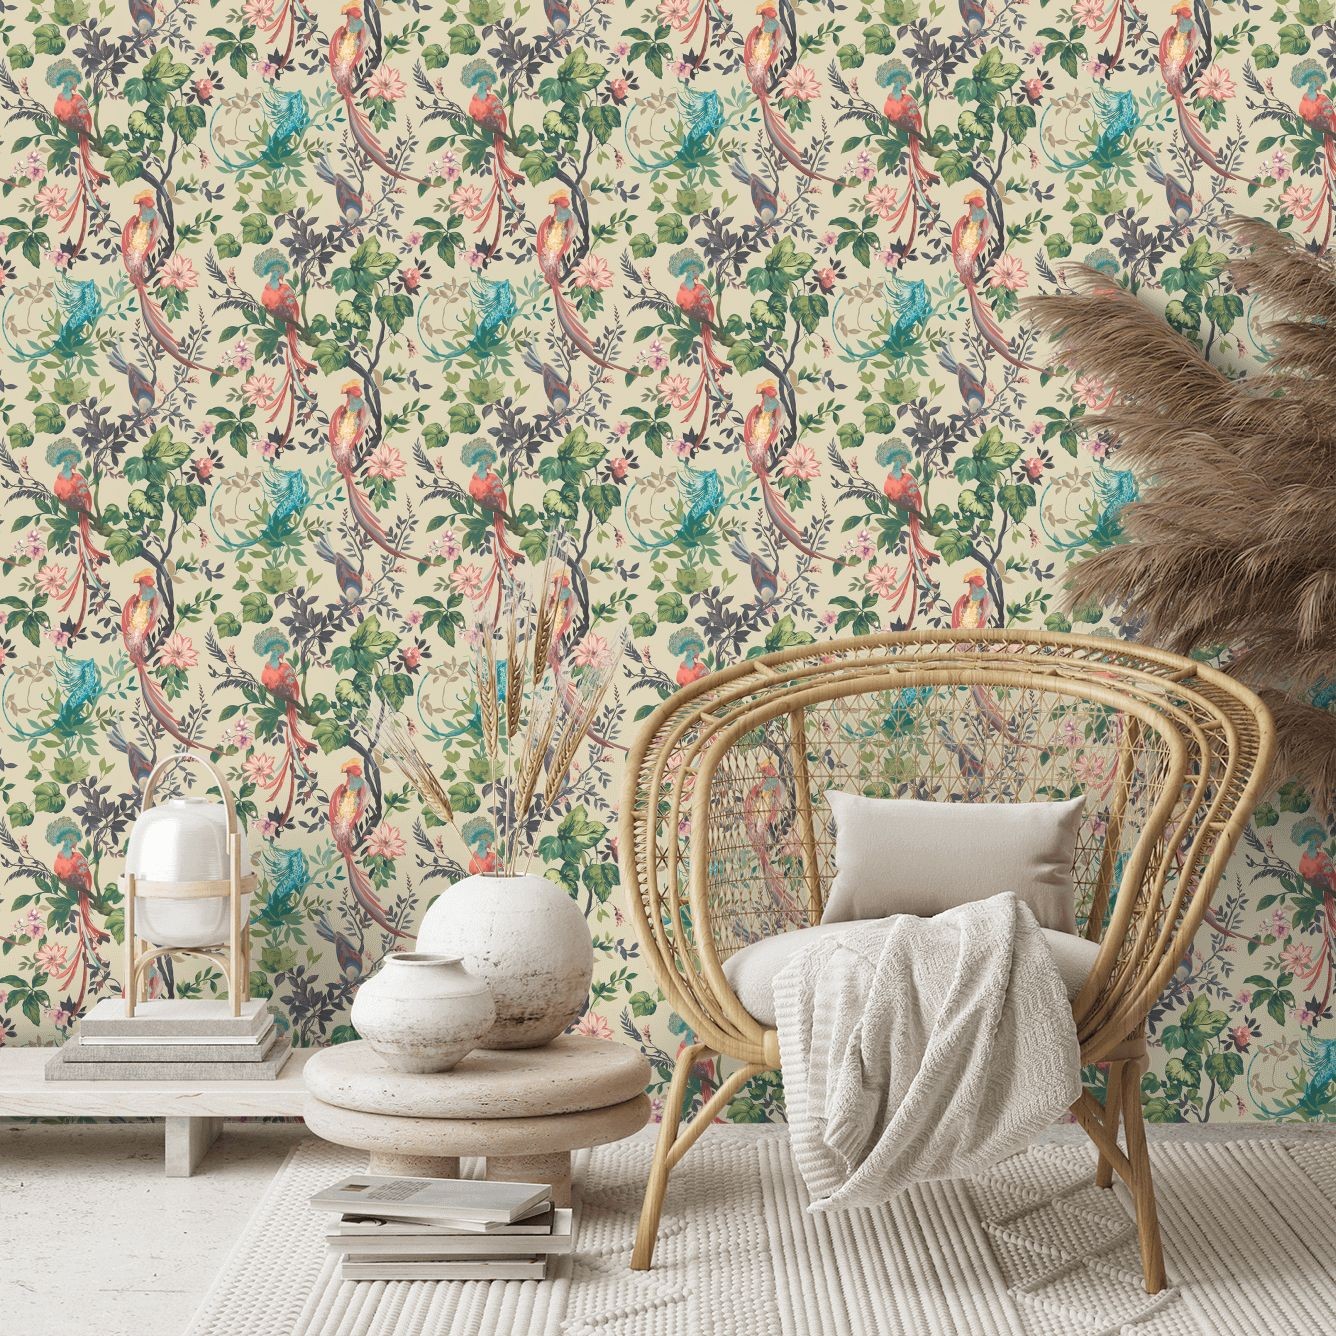 Bird Sonnet Mural Wallpaper - Lacquer - By 1838 Wallcoverings - 2109-157-01